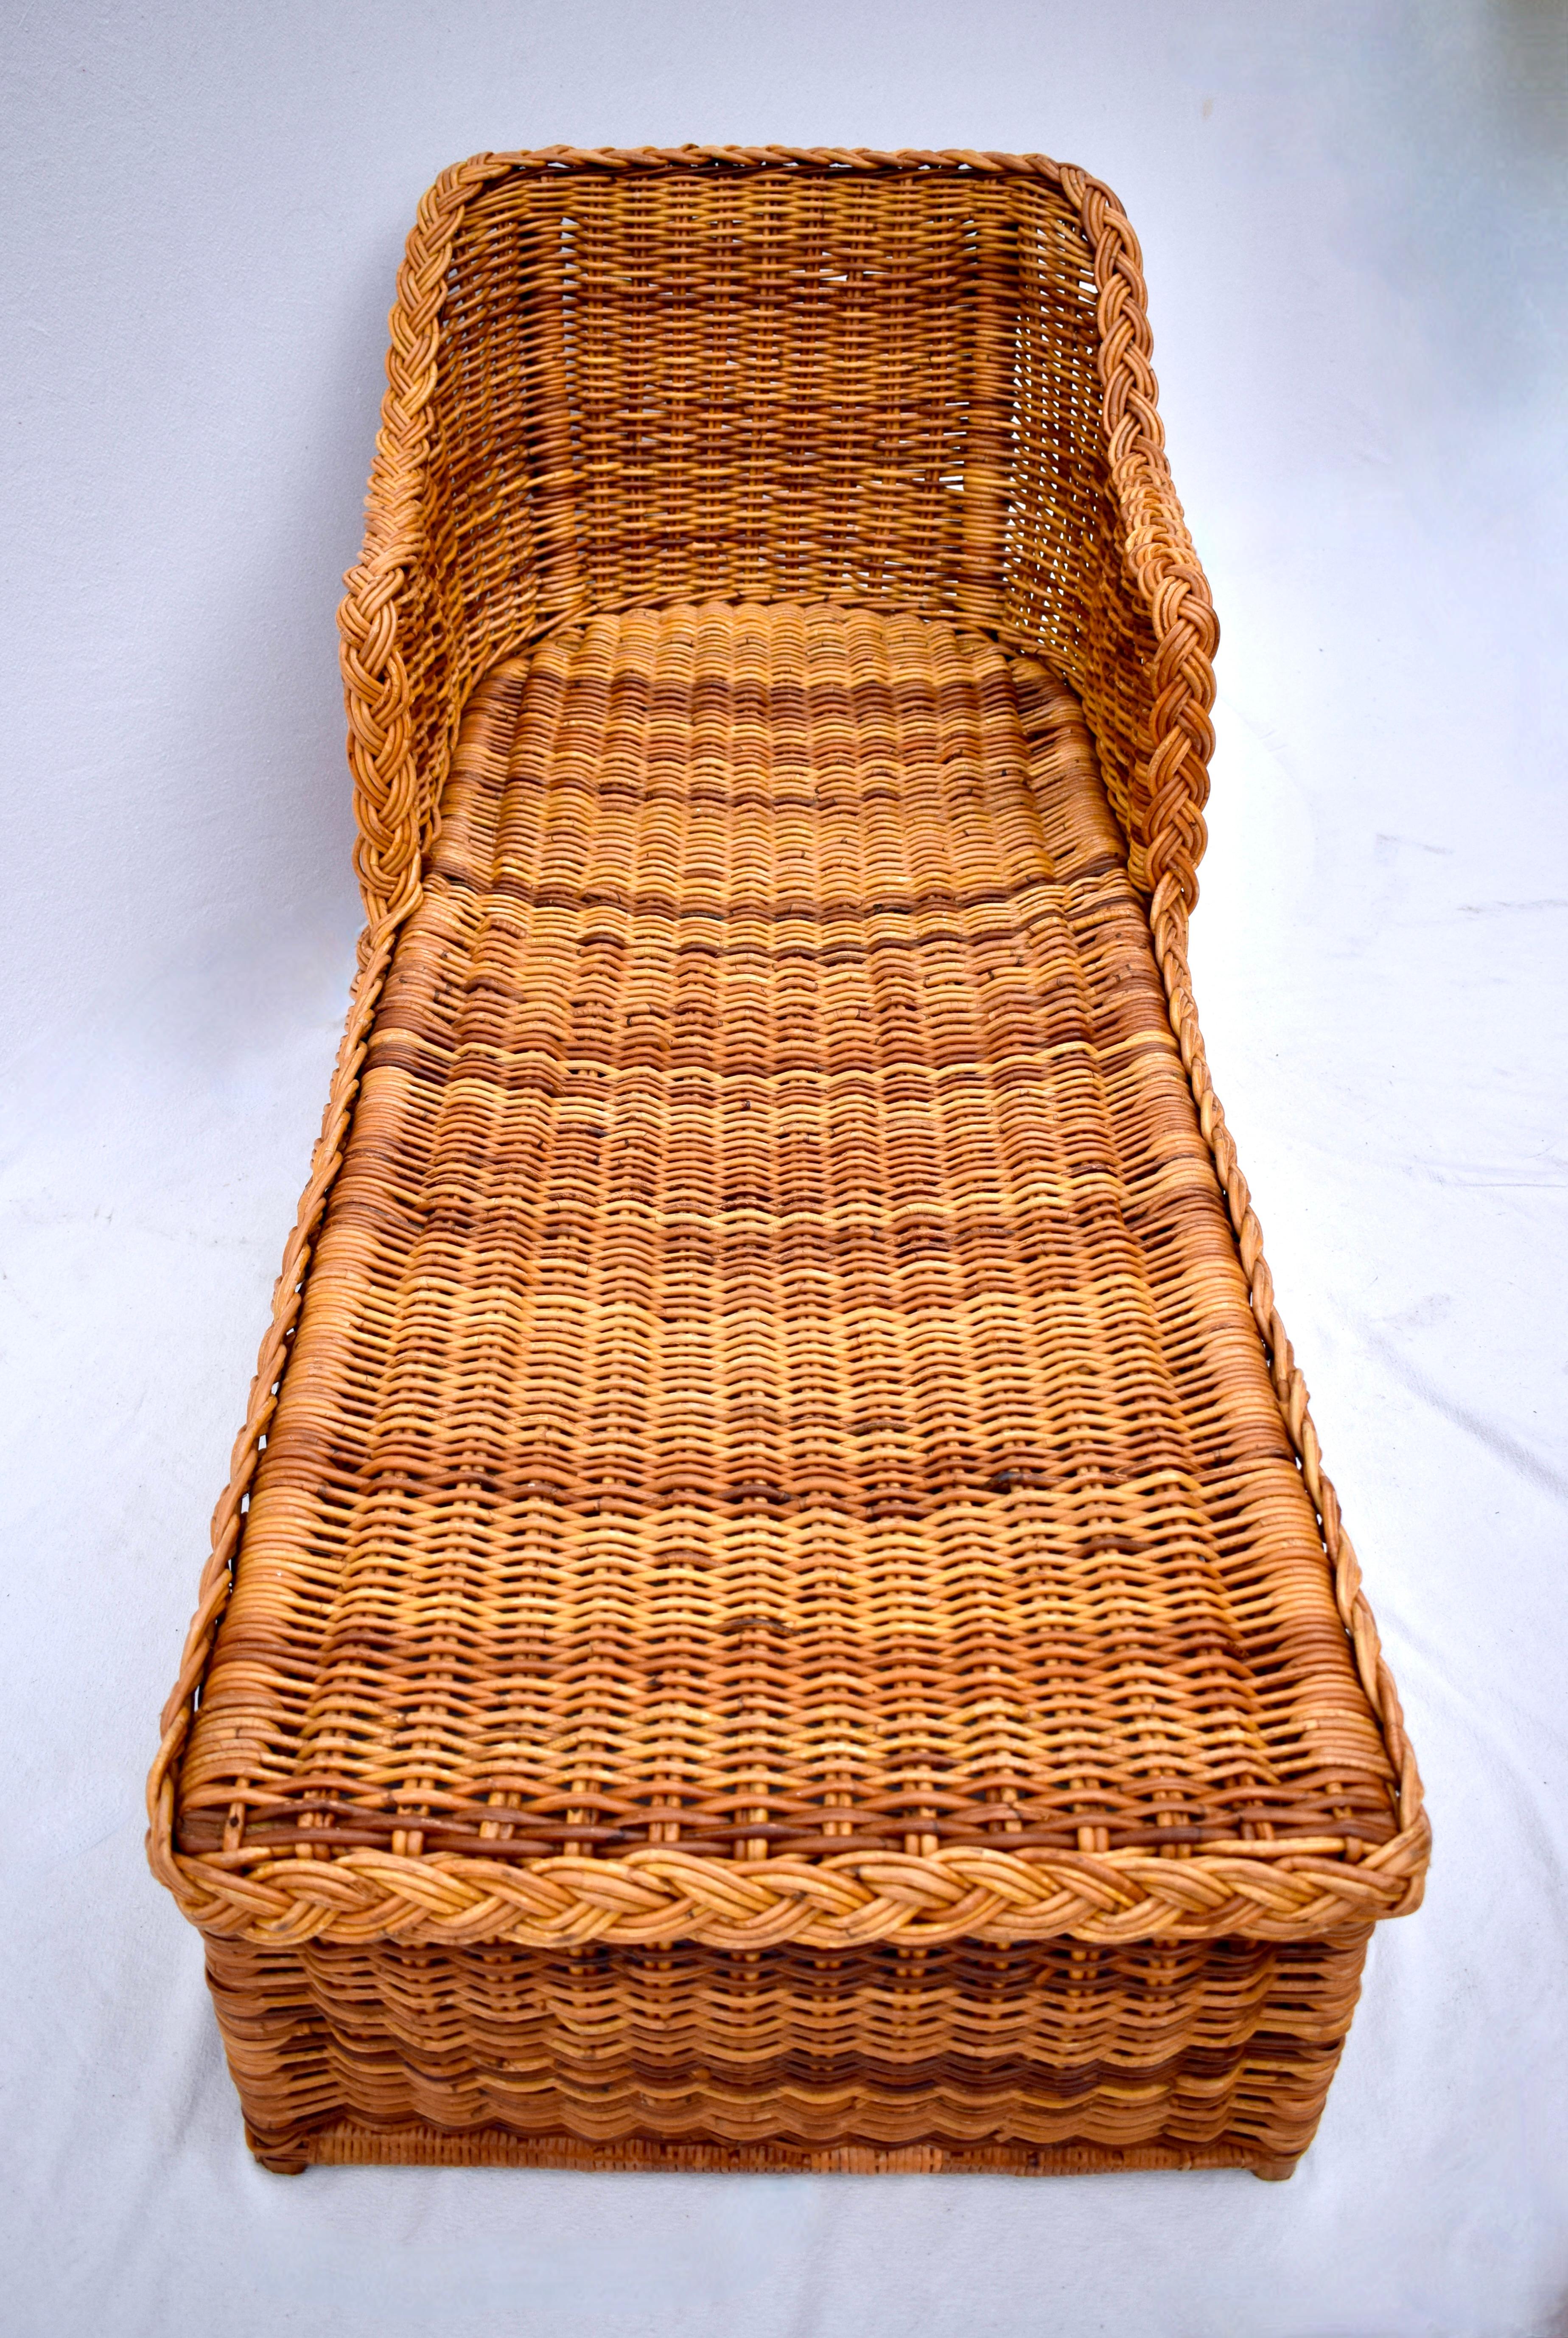 1960's Michael Taylor Braided Wicker Rattan Chaise Lounge Daybed For Sale 2